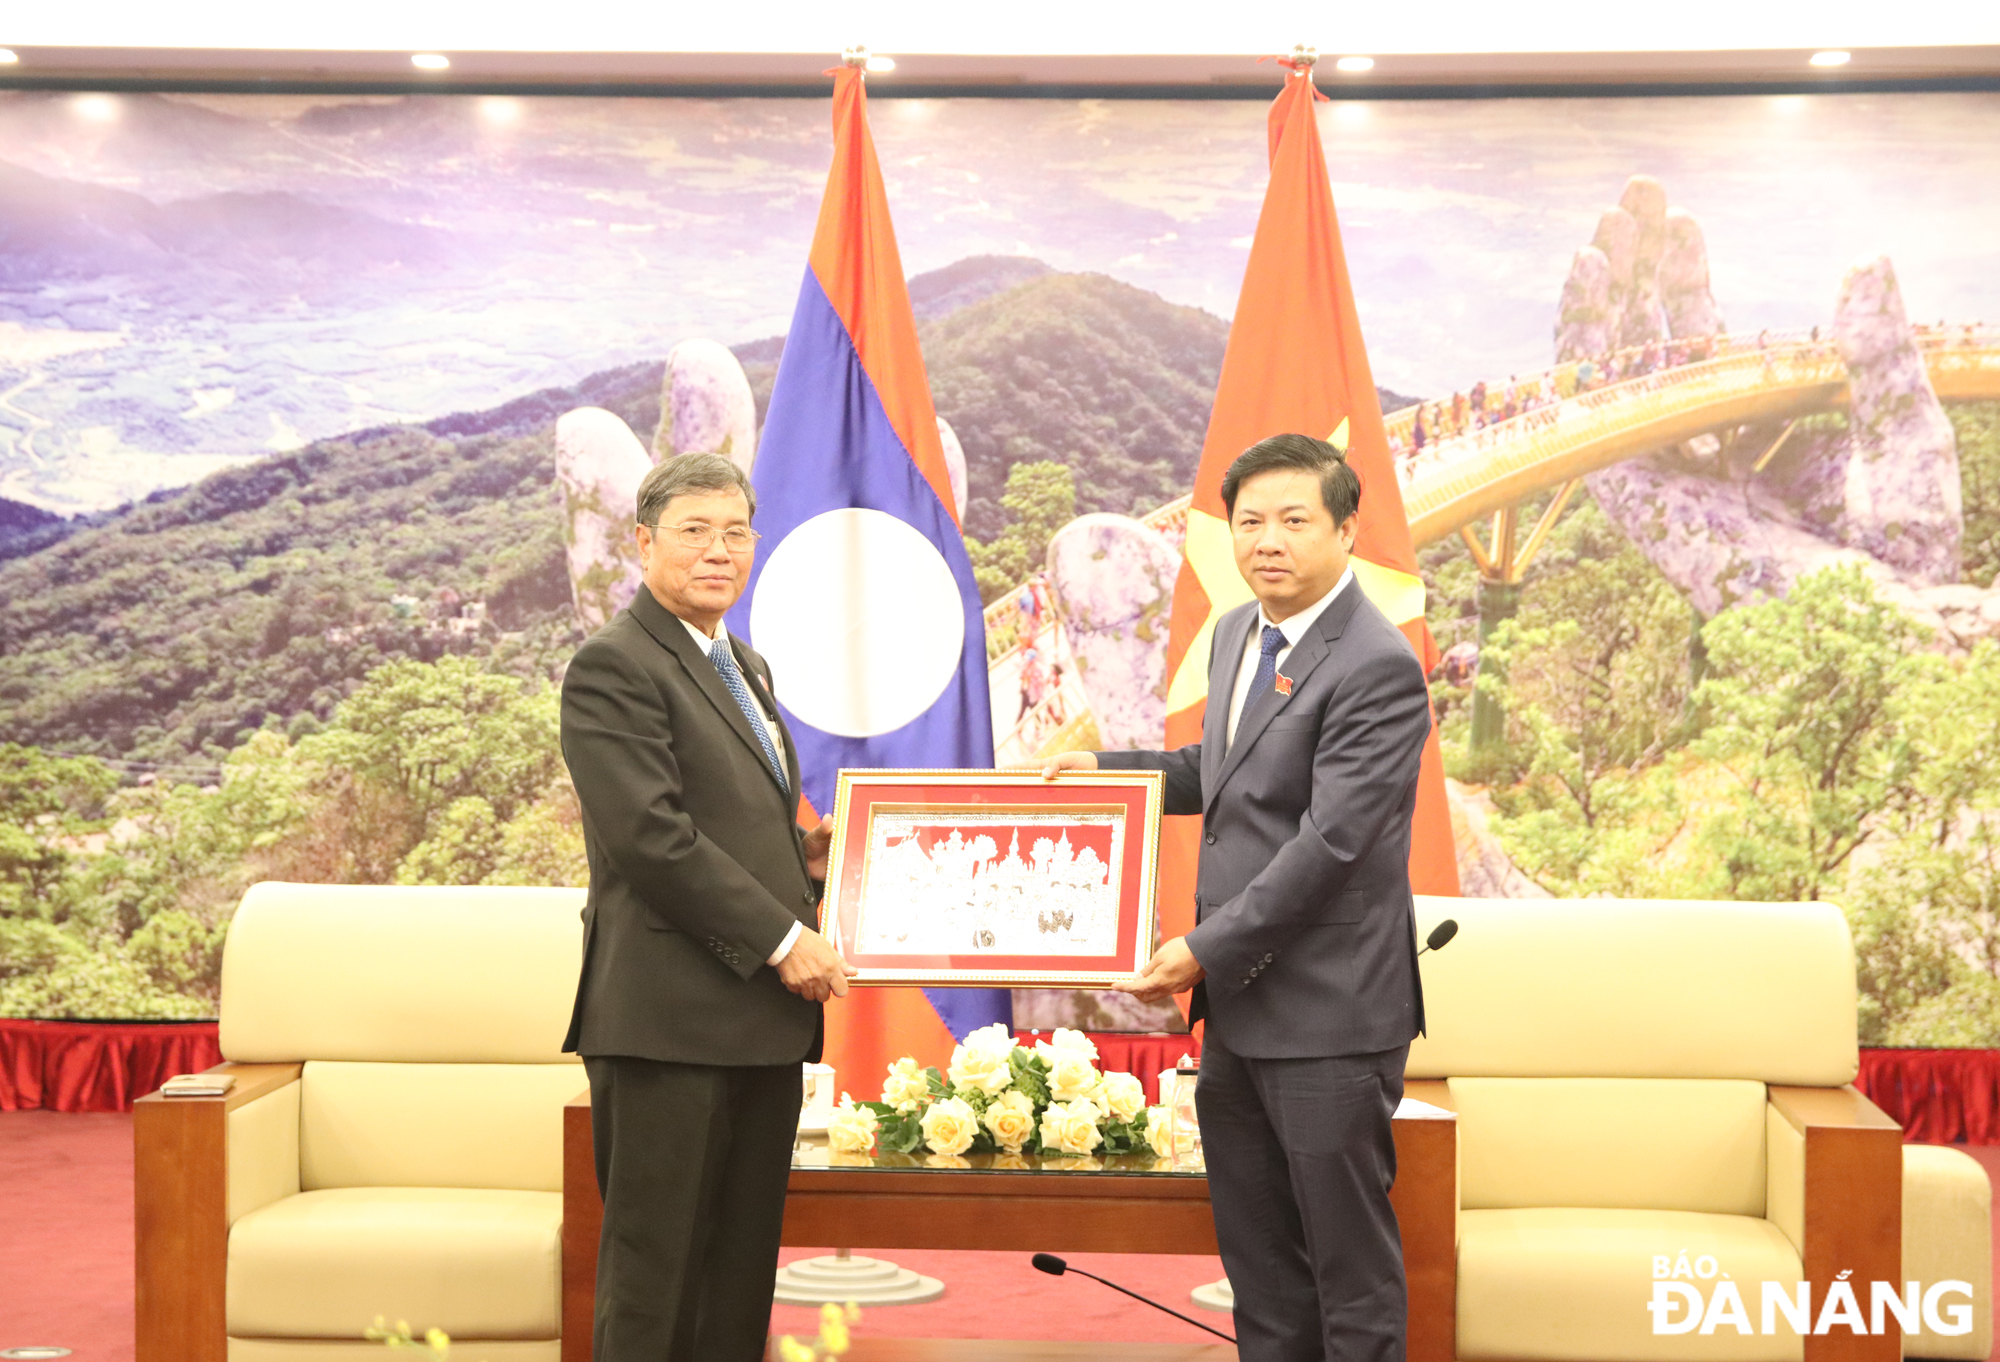 Deputy Secretary of the Da Nang Party Committee cum Chairman of the municipal People's Council Luong Nguyen Minh Triet (right), received a souvenir presented by the Vice Chairman of the National Assembly of Laos Khambay Damlath. Photo: TRONG HUY